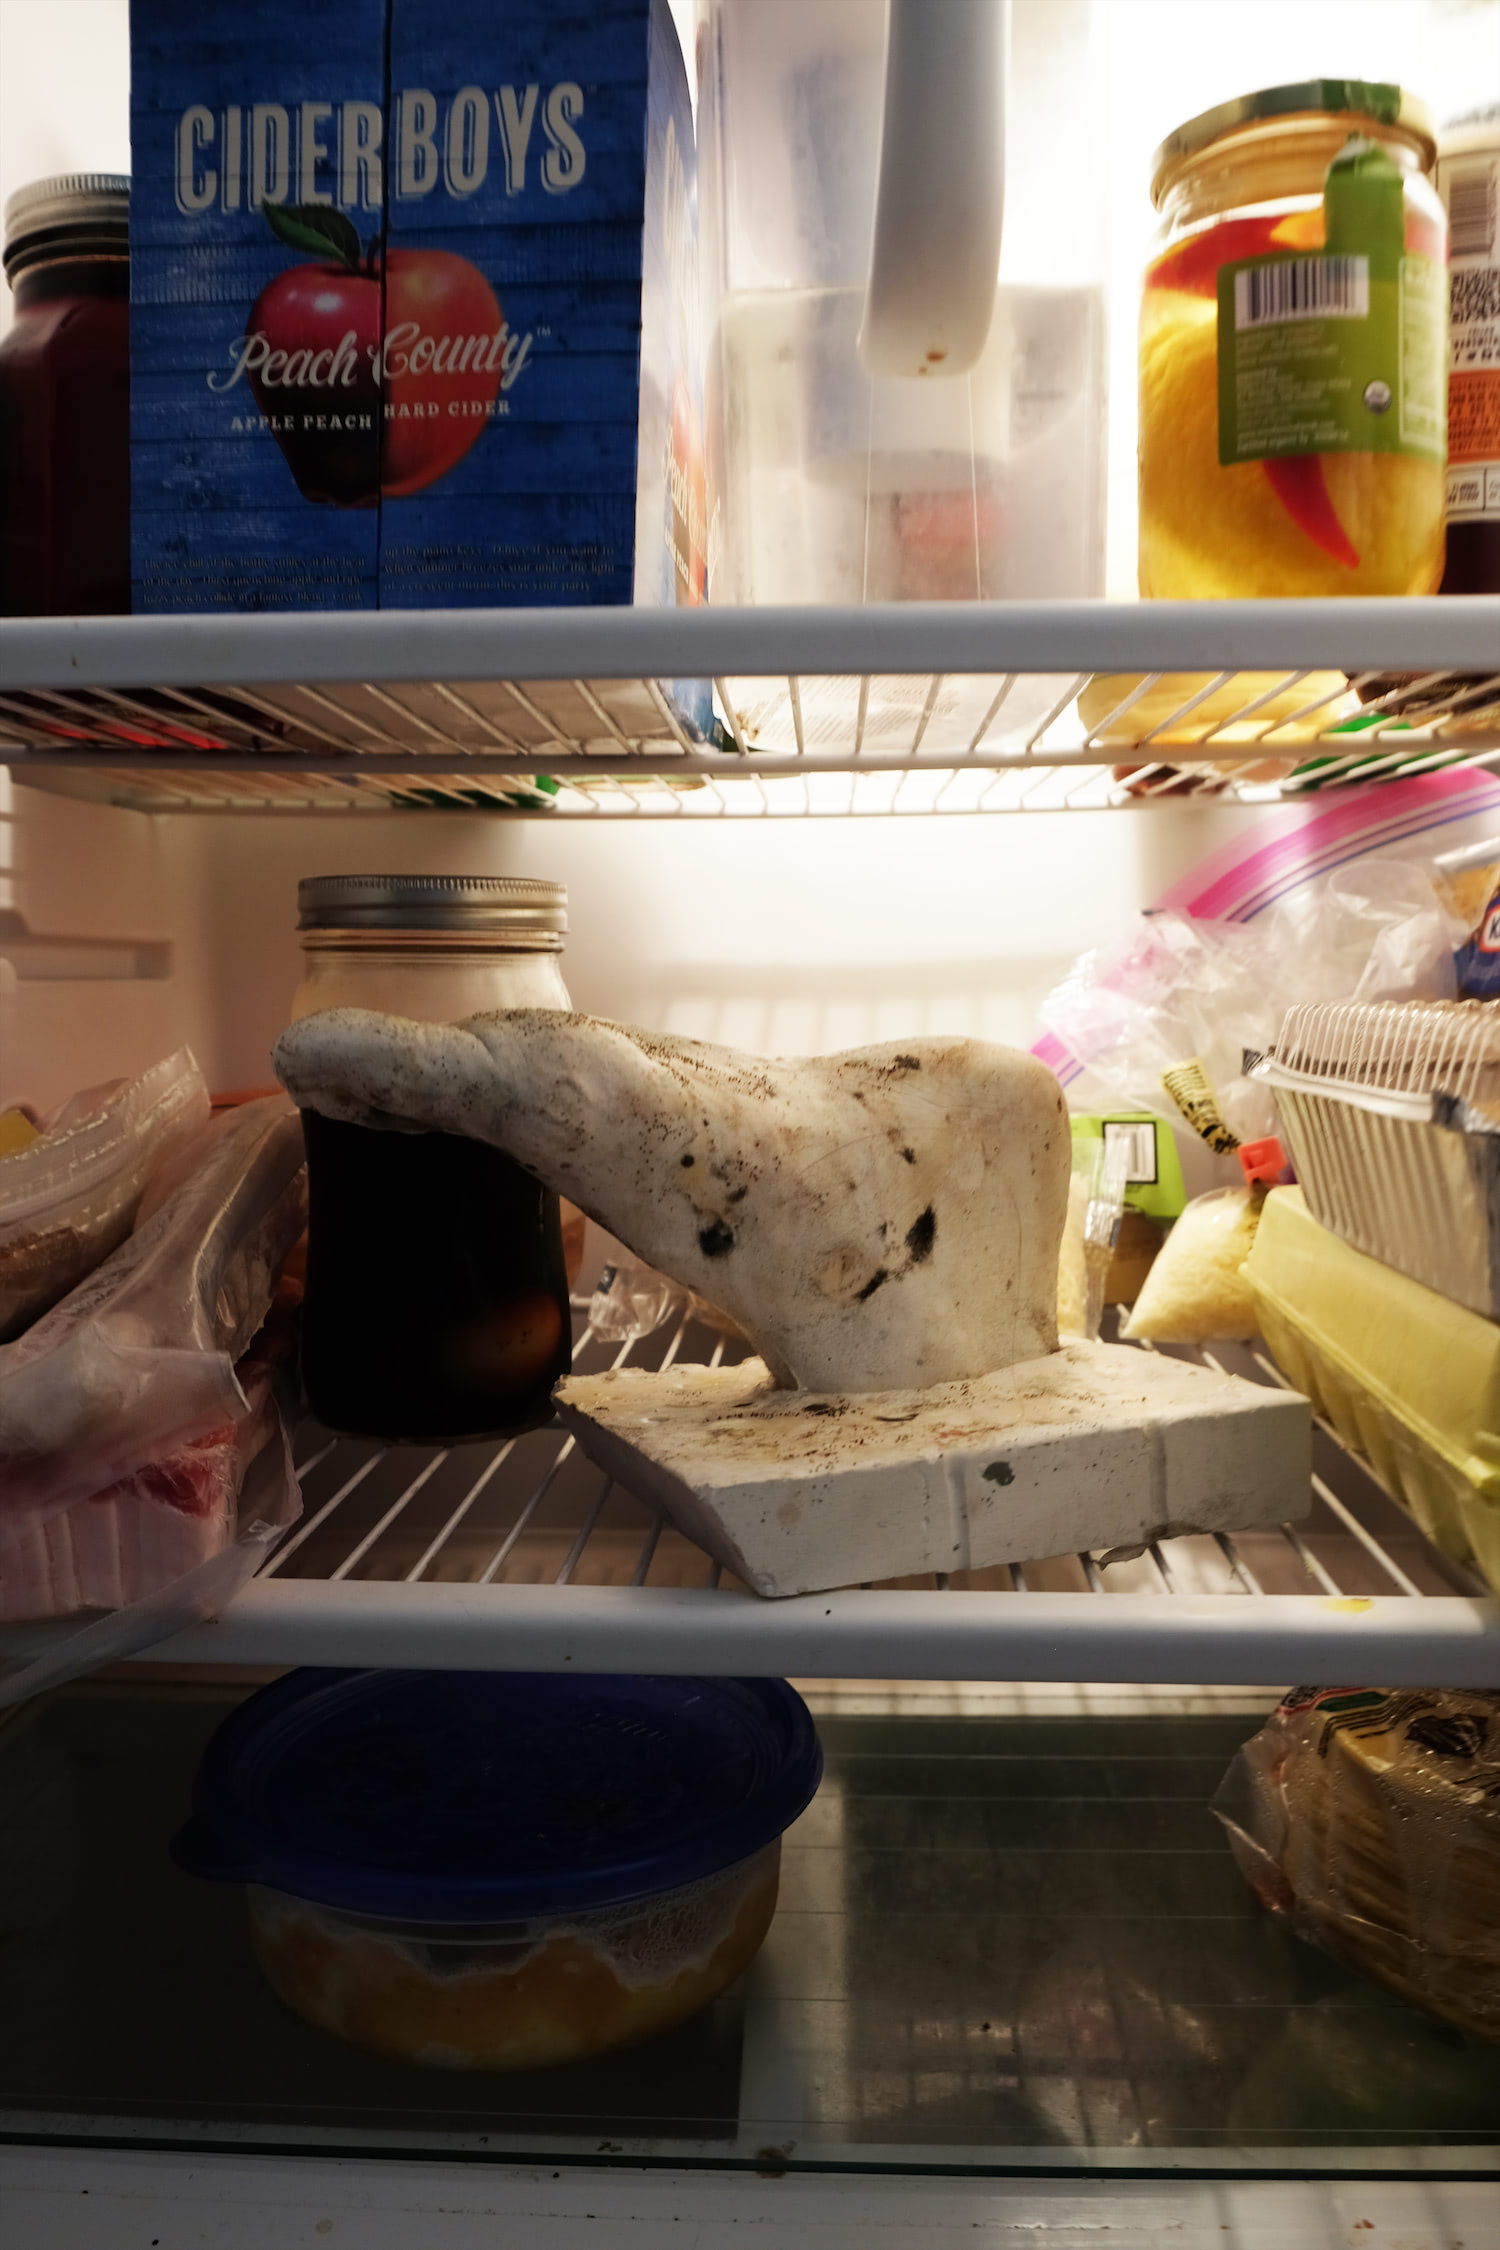 A plaster foot covered in bacteria sitting in a fridge full of food.